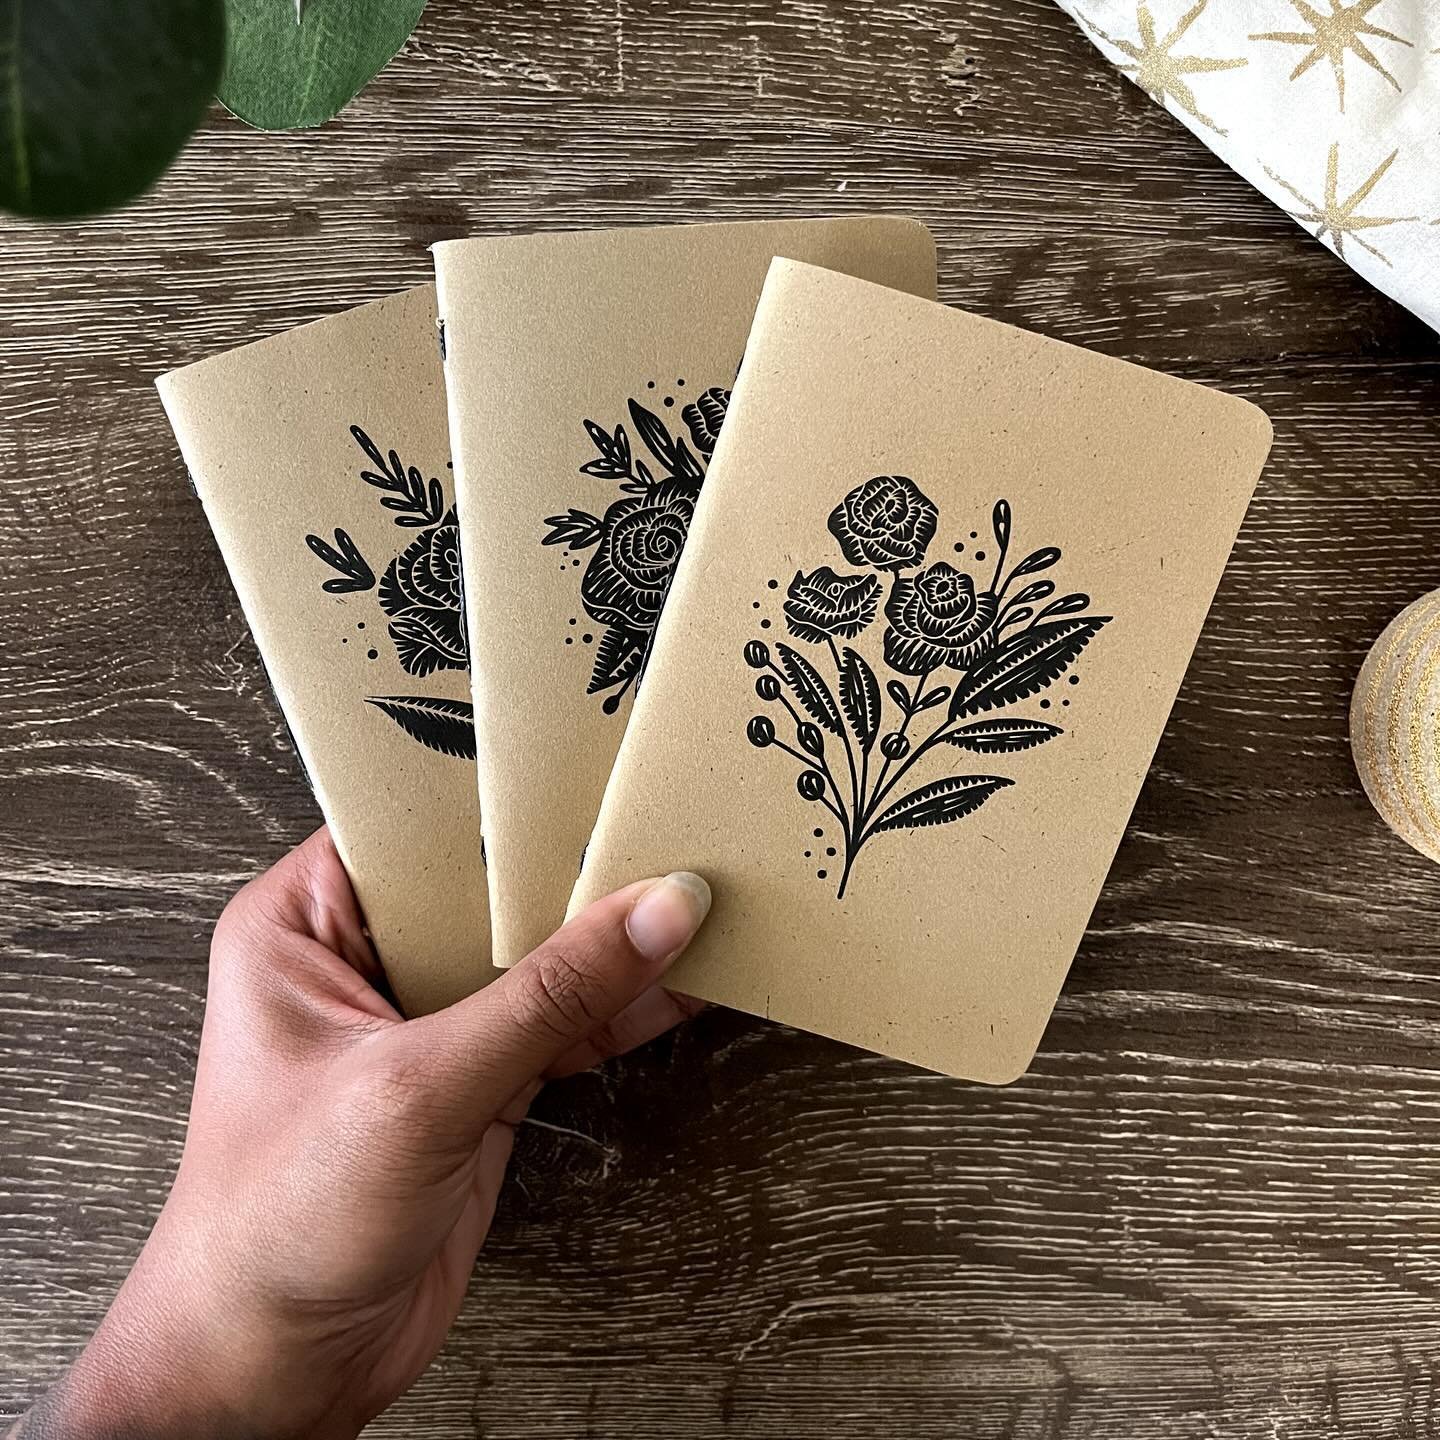 Handcrafted mini sketchbooks, now available! These pocket-sized wonders feature intricately illustrated bouquets of rosebuds, inspired by the rich traditional of linocut printmaking and traditional tattoos. Ignite your imagination wherever inspiratio